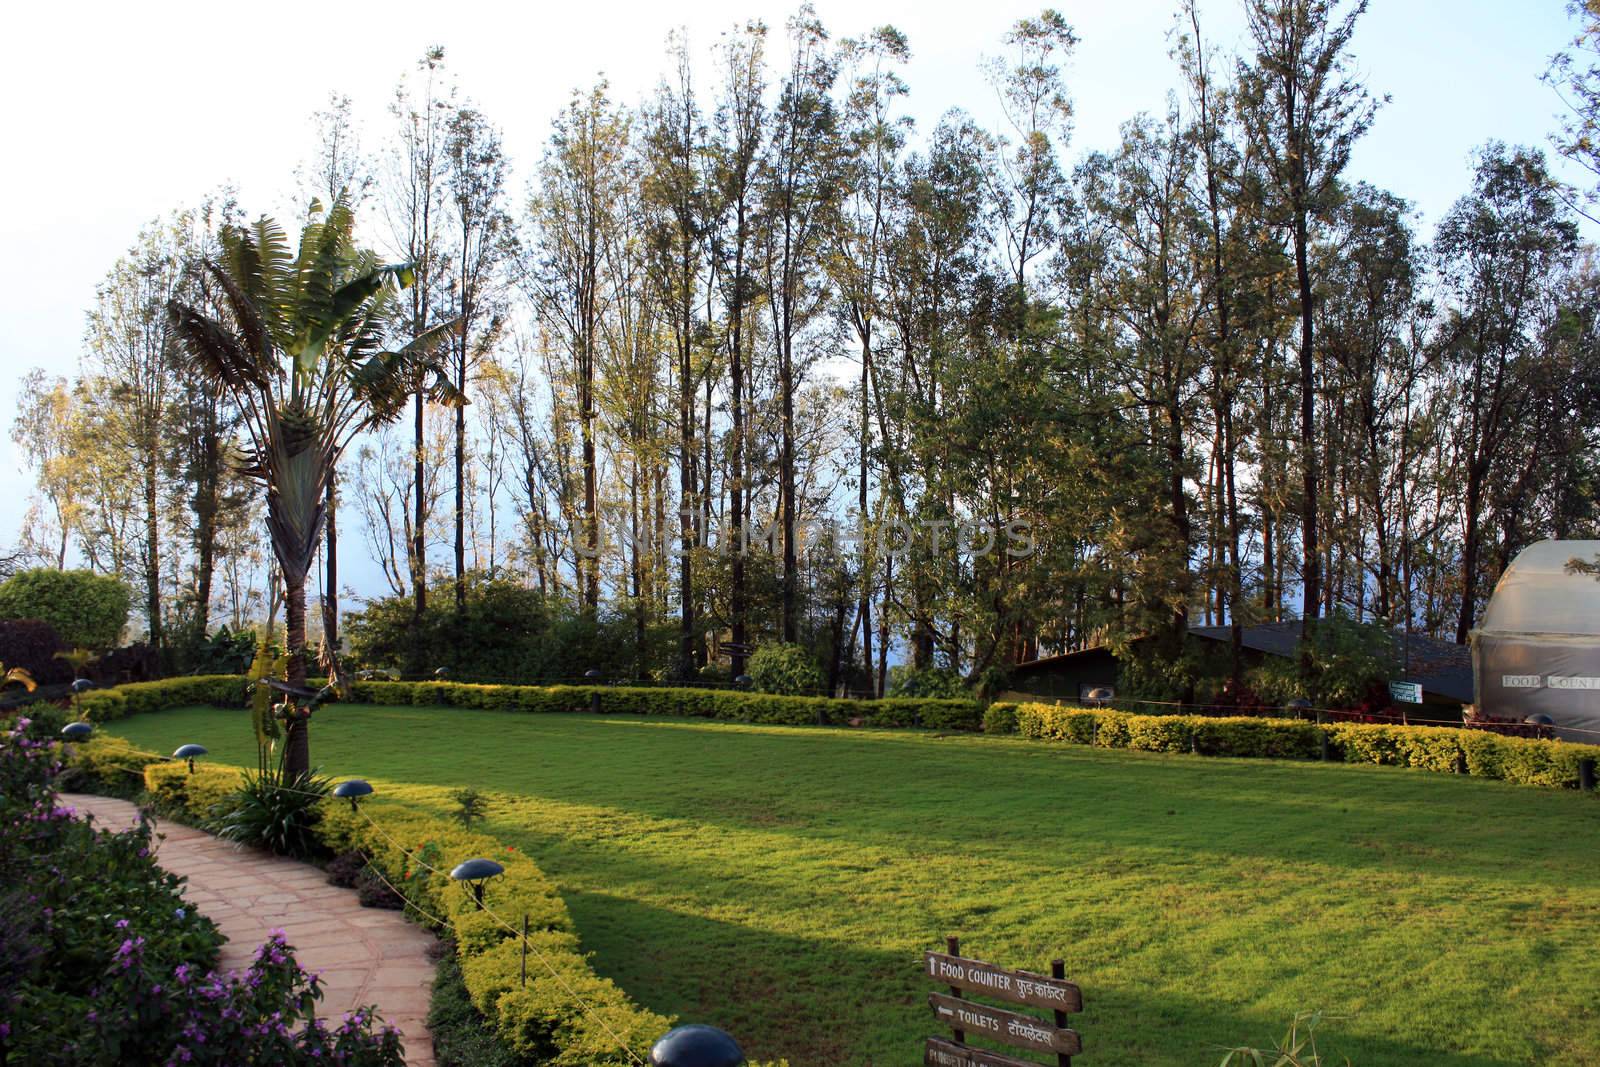 A background of a beautifully landscaped garden on an Indian hill-station.